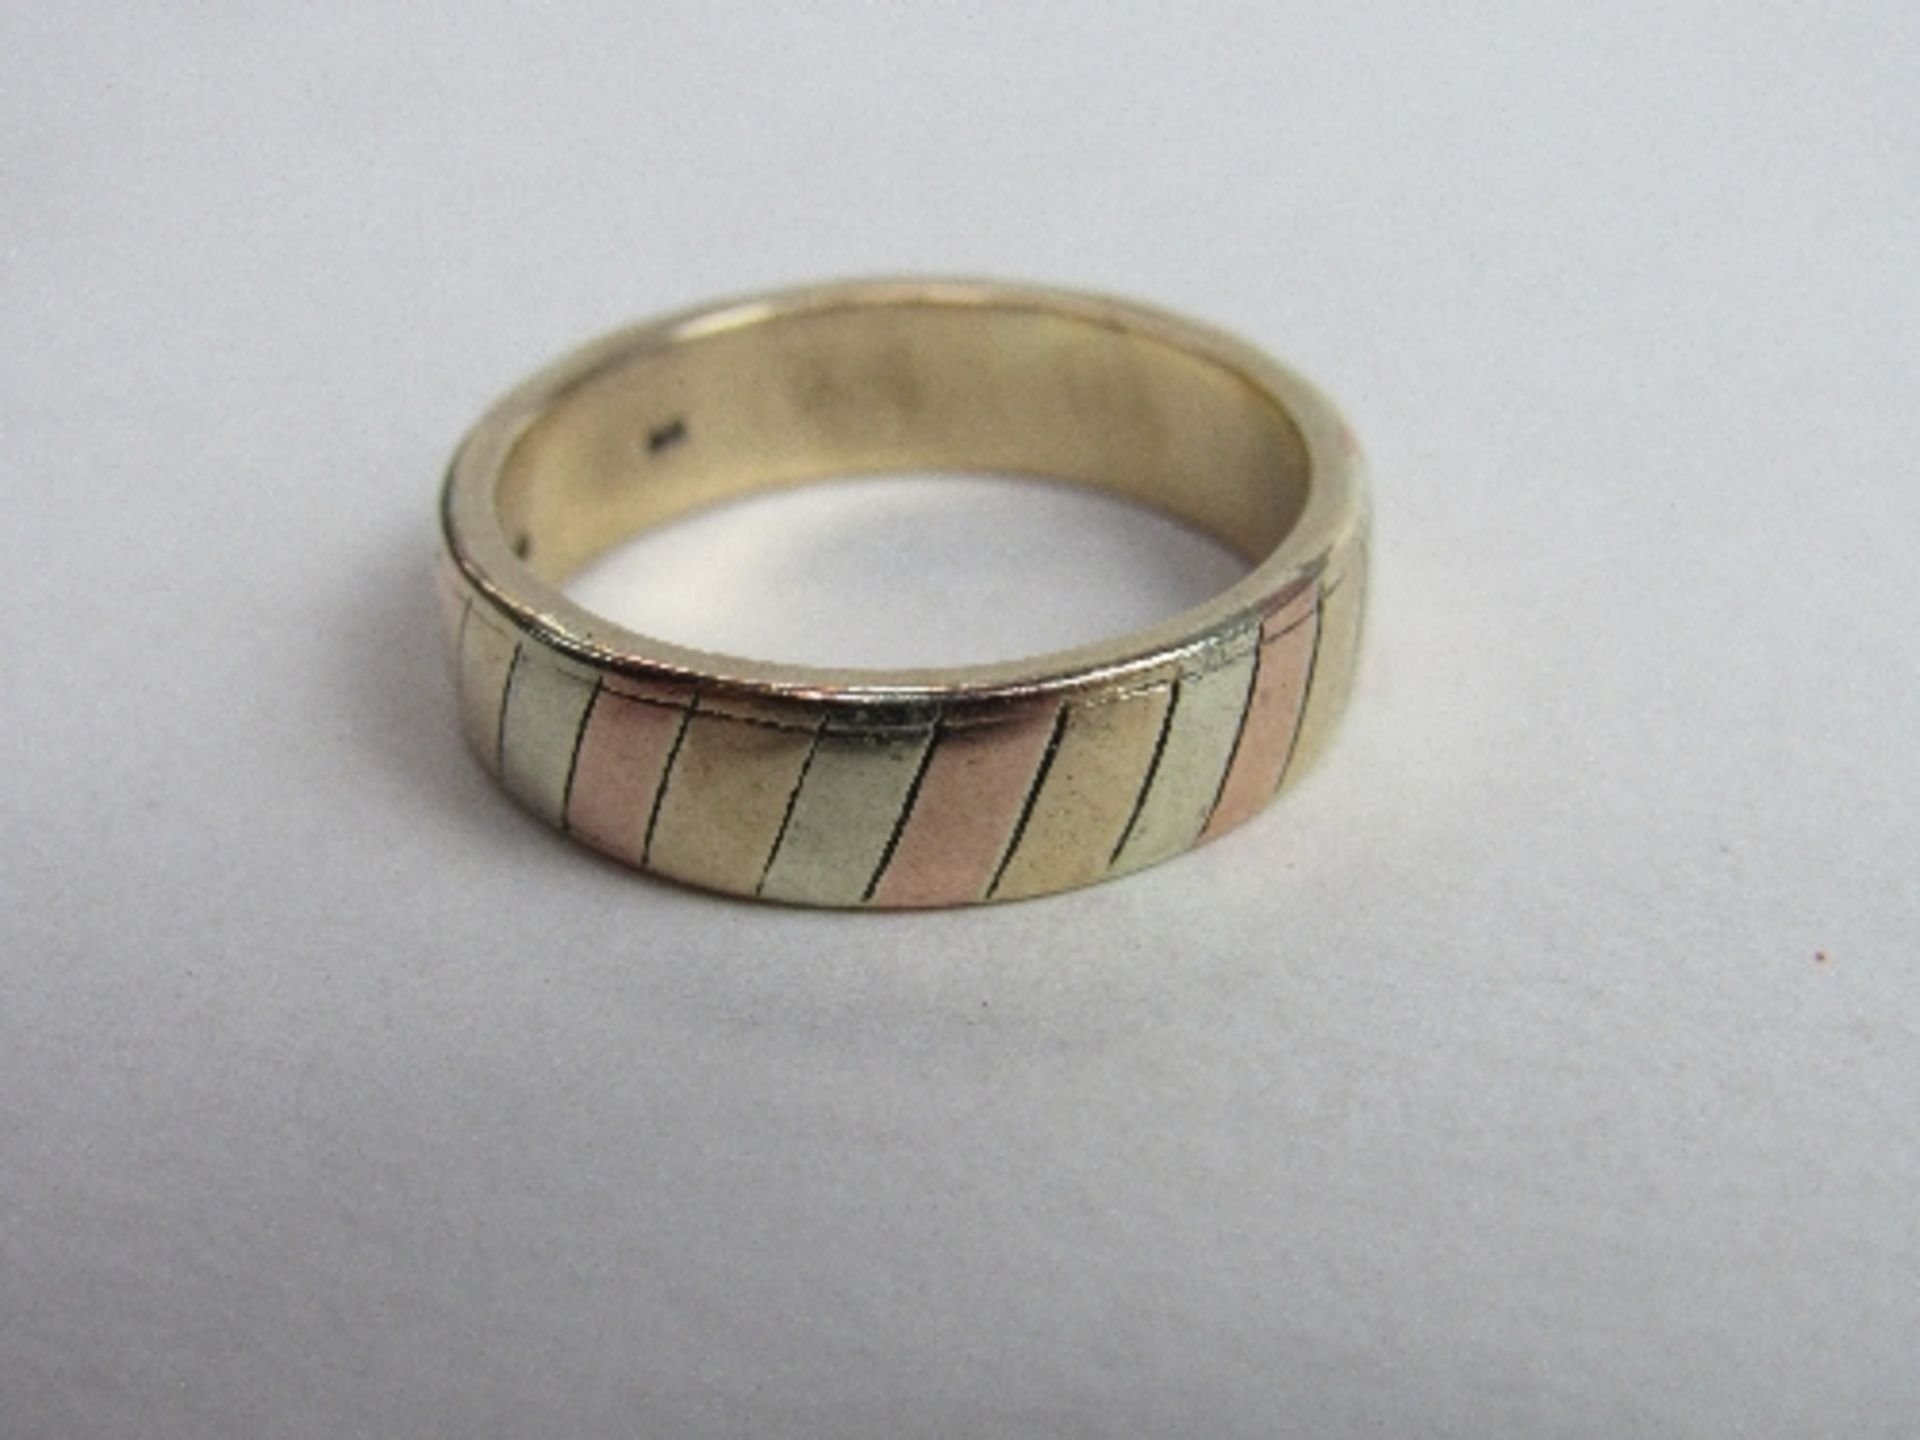 9ct white, yellow & rose gold band, wt 5.8gms. Price guide £50-60.